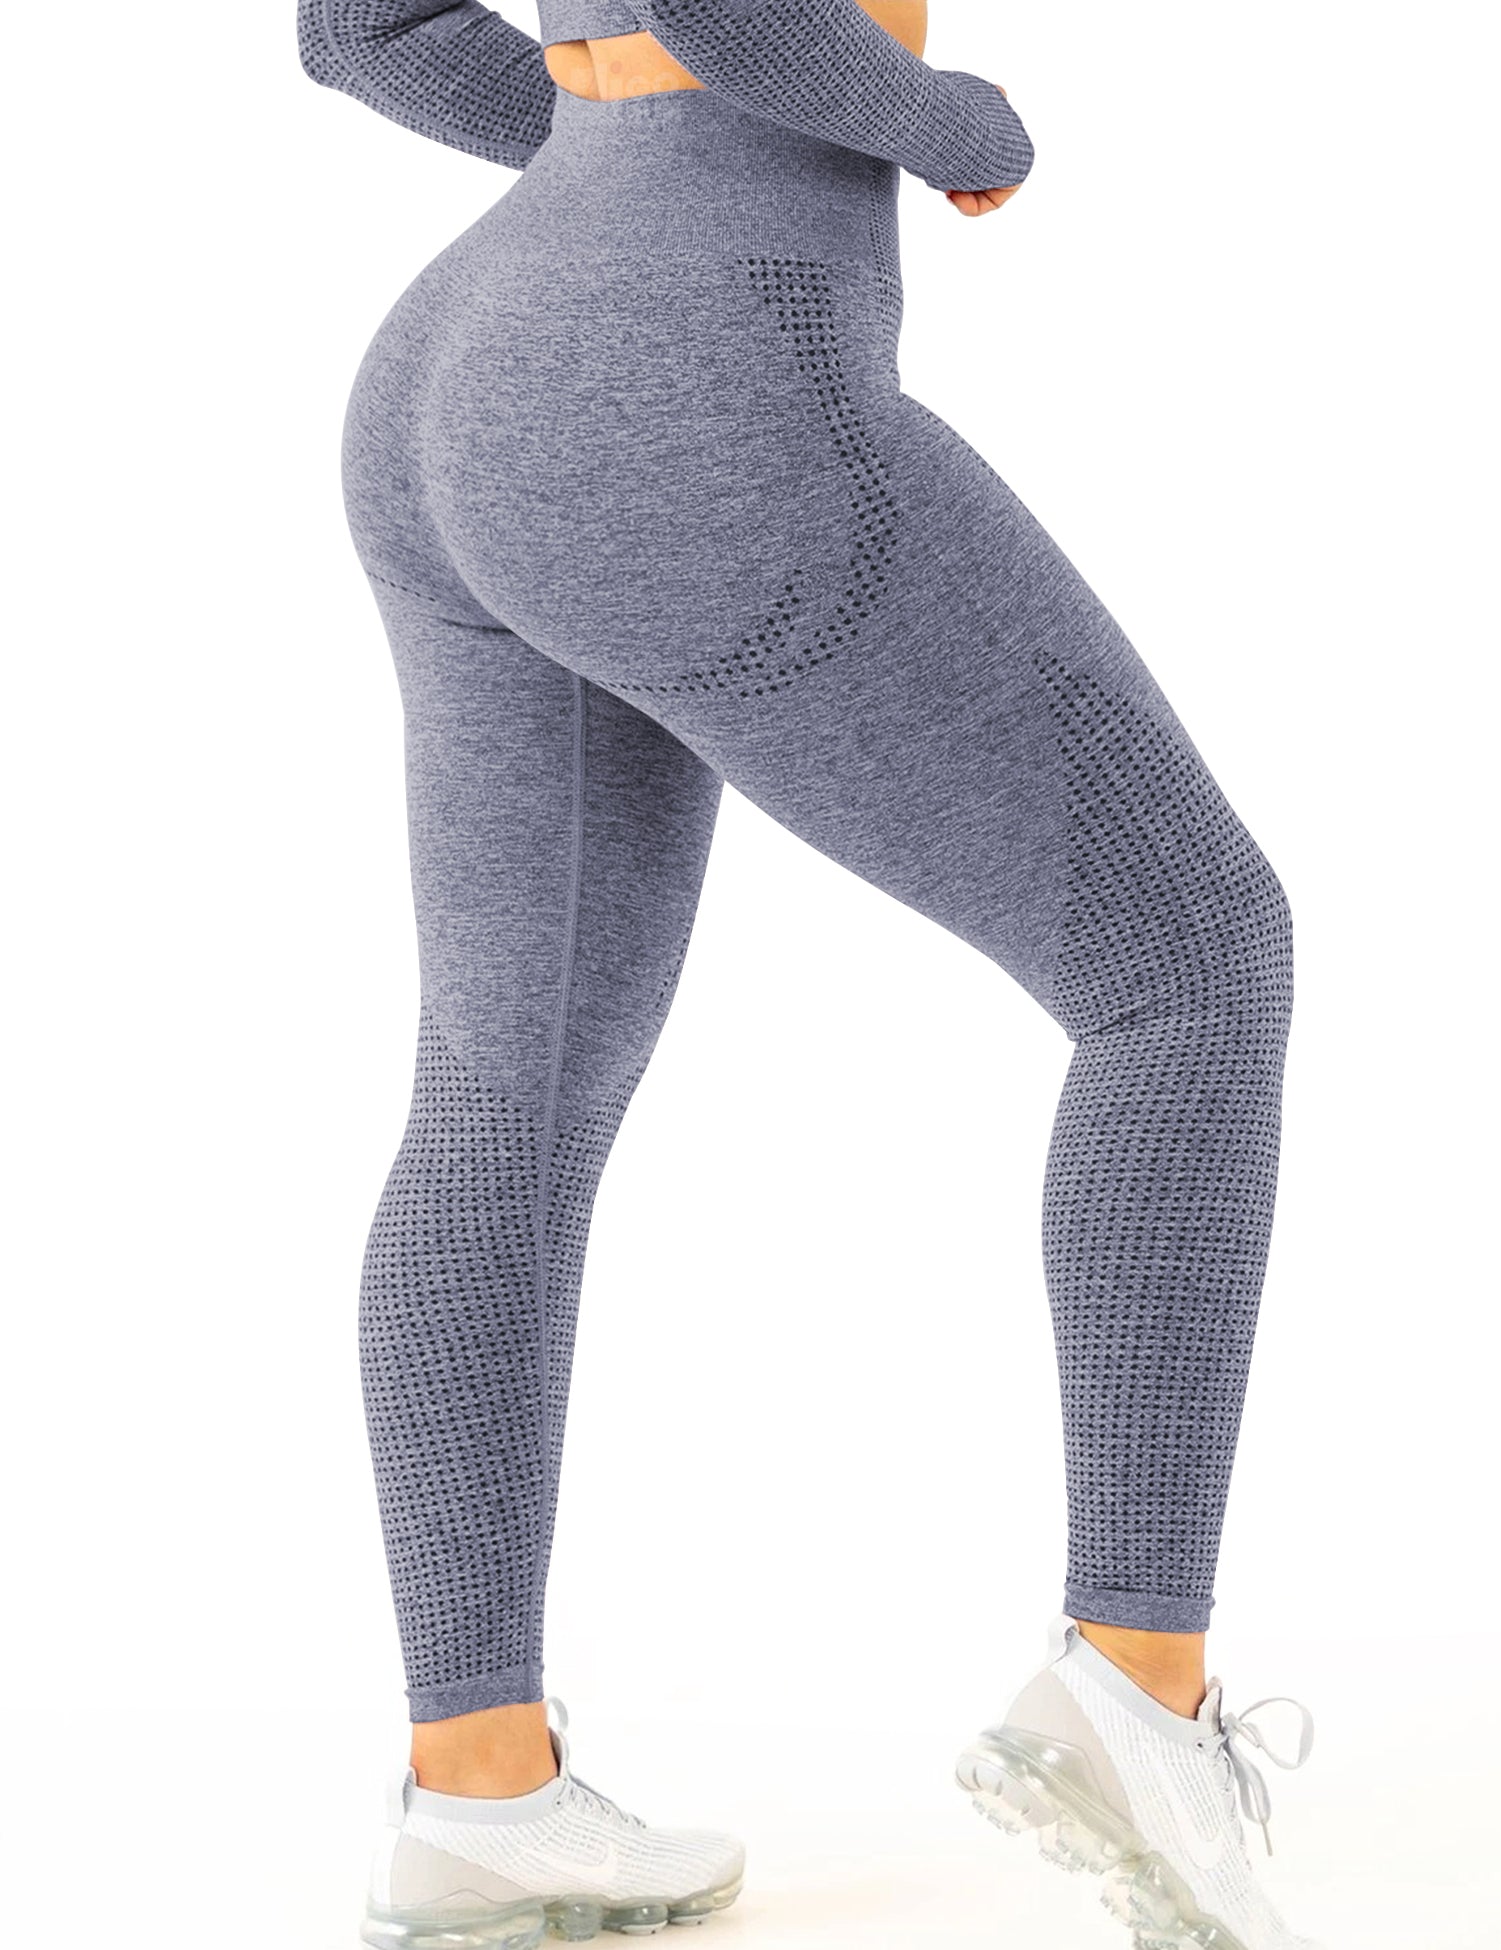 HIGORUN leggings is the most affordable and most flattering